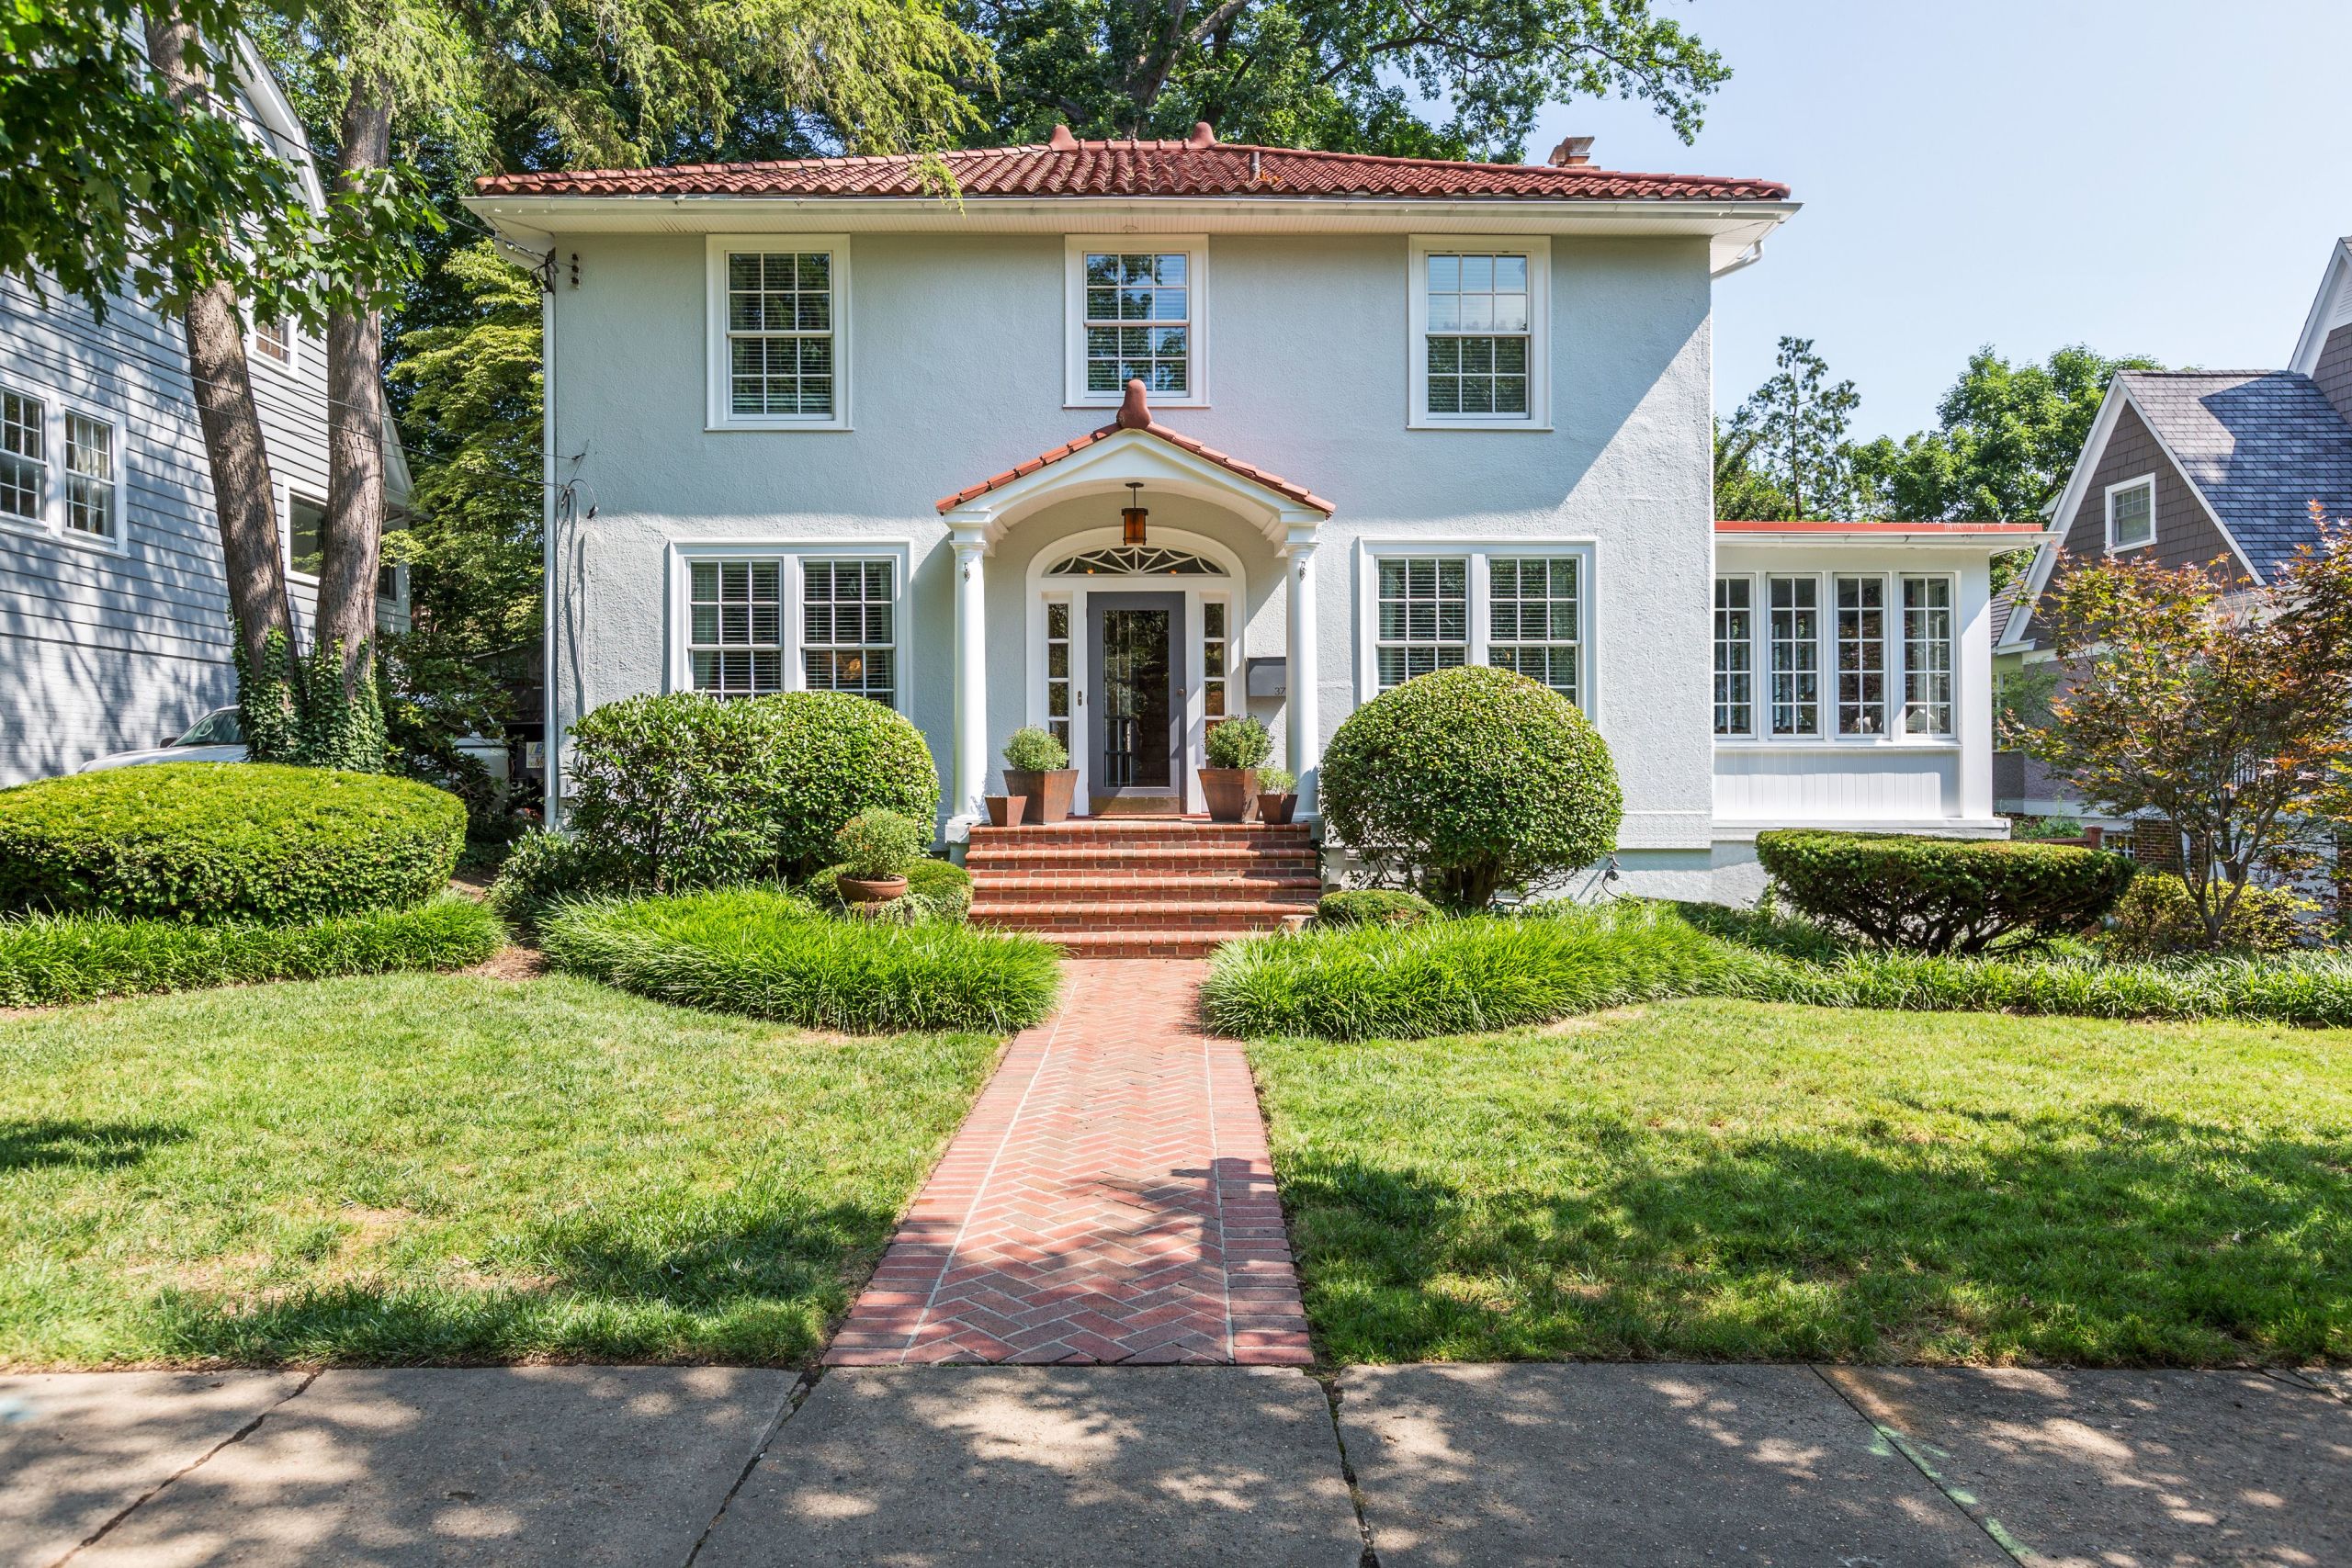 SOLD - Chevy Chase, MD - $1,450,000 - Represented Buyer